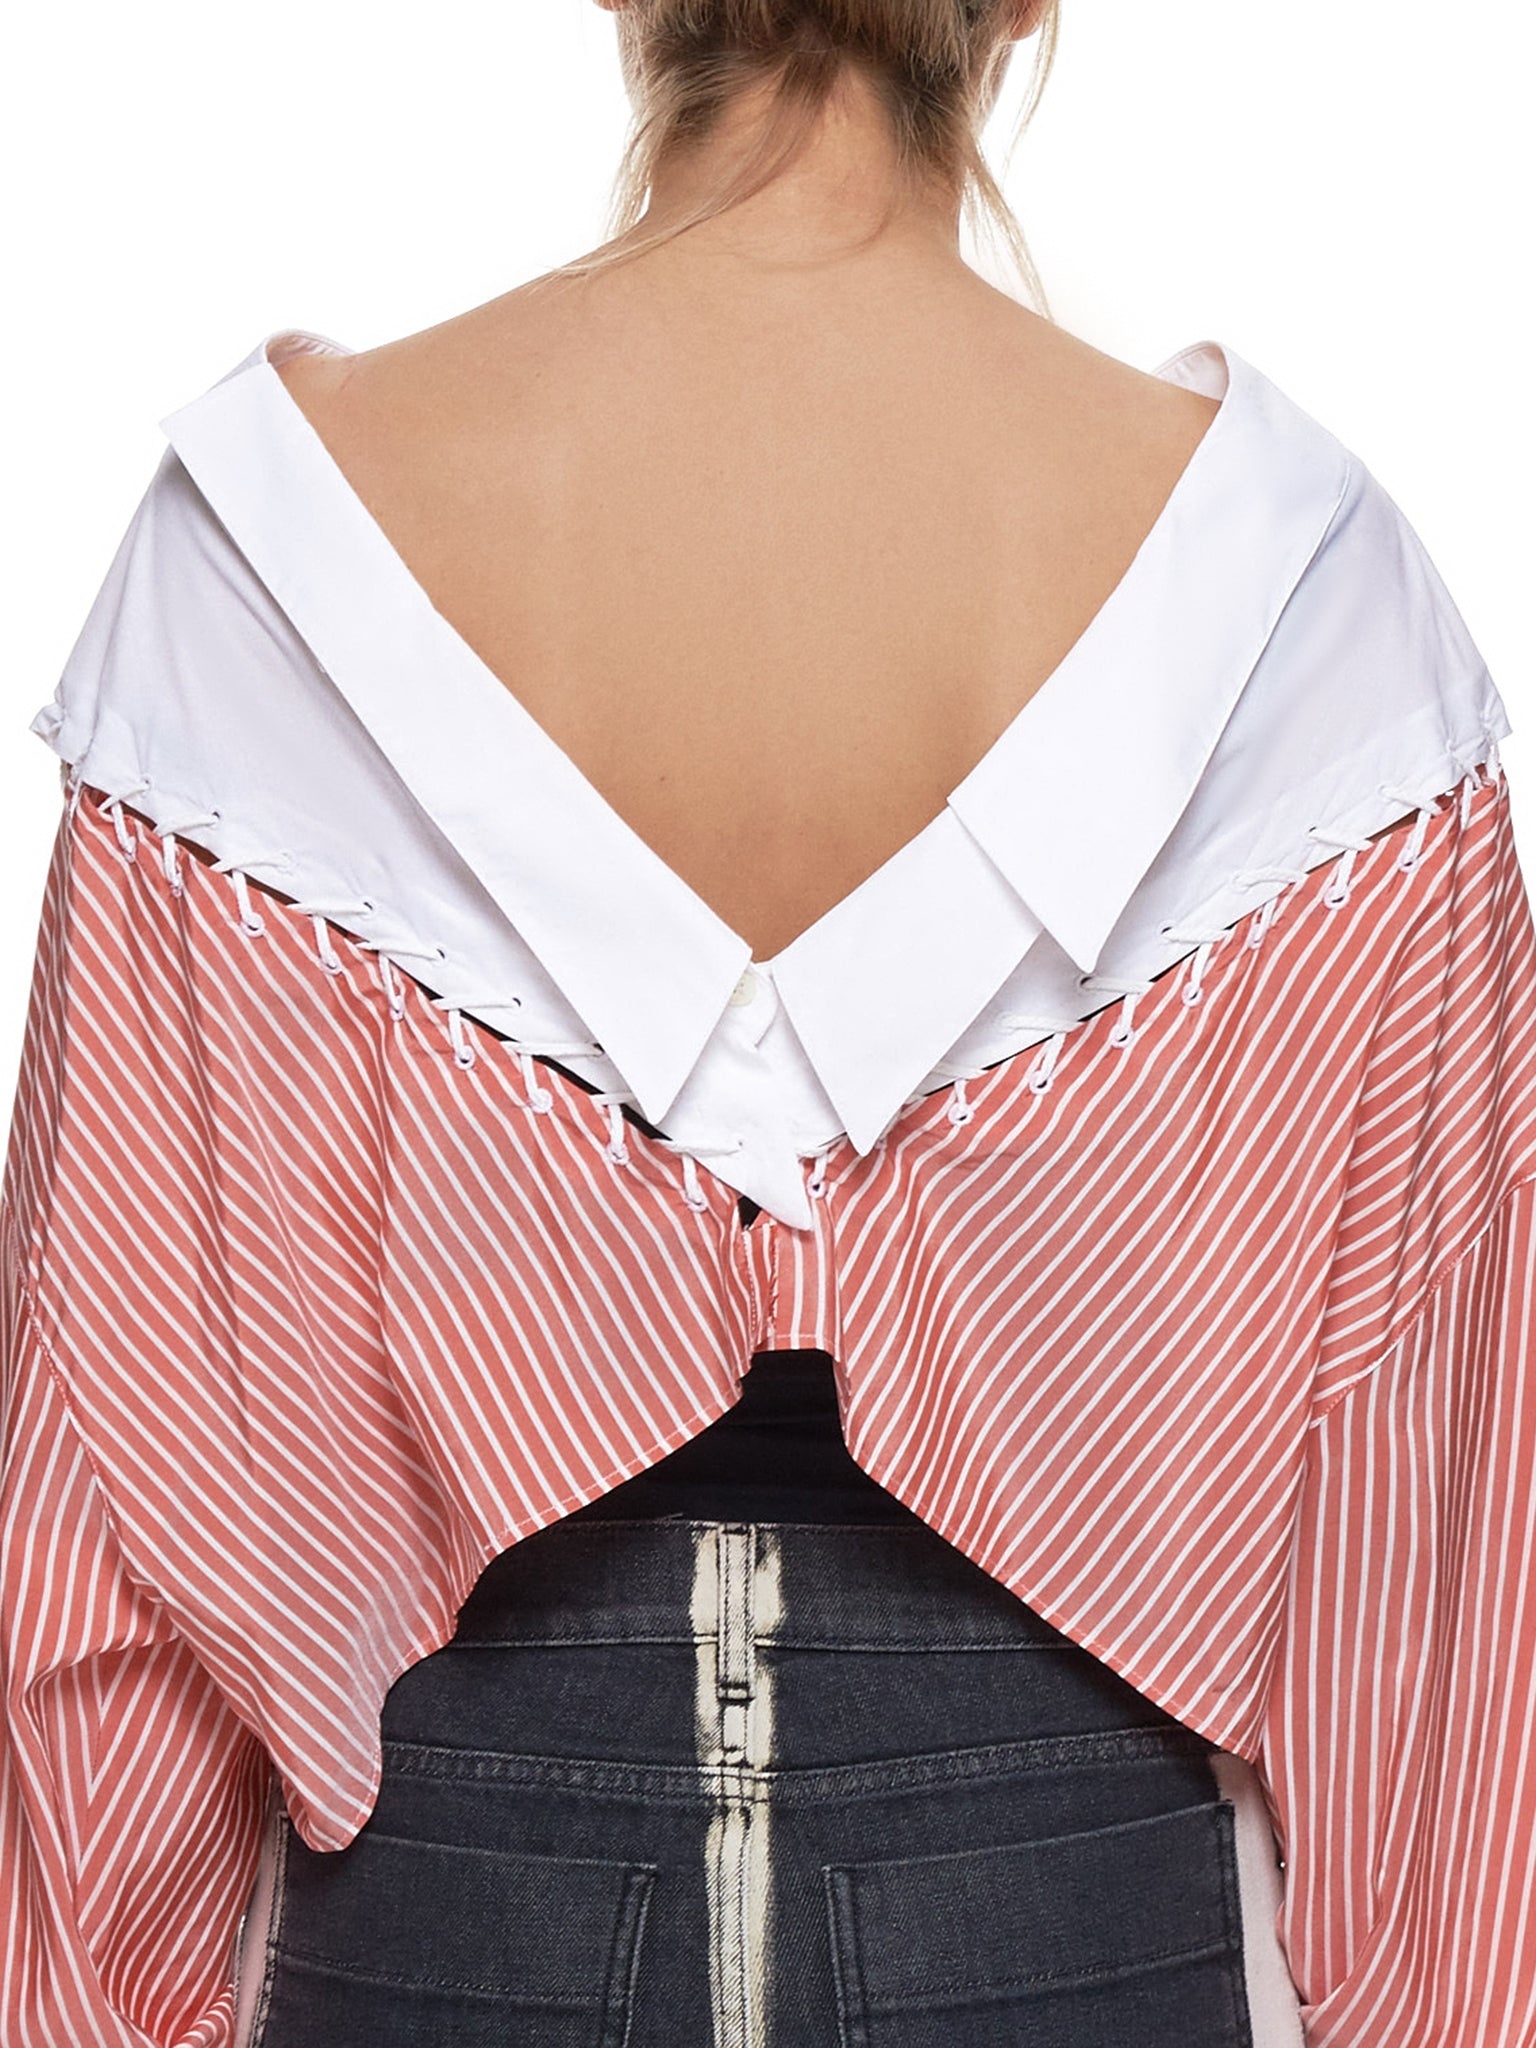 Lace Up Stripe Top - 5